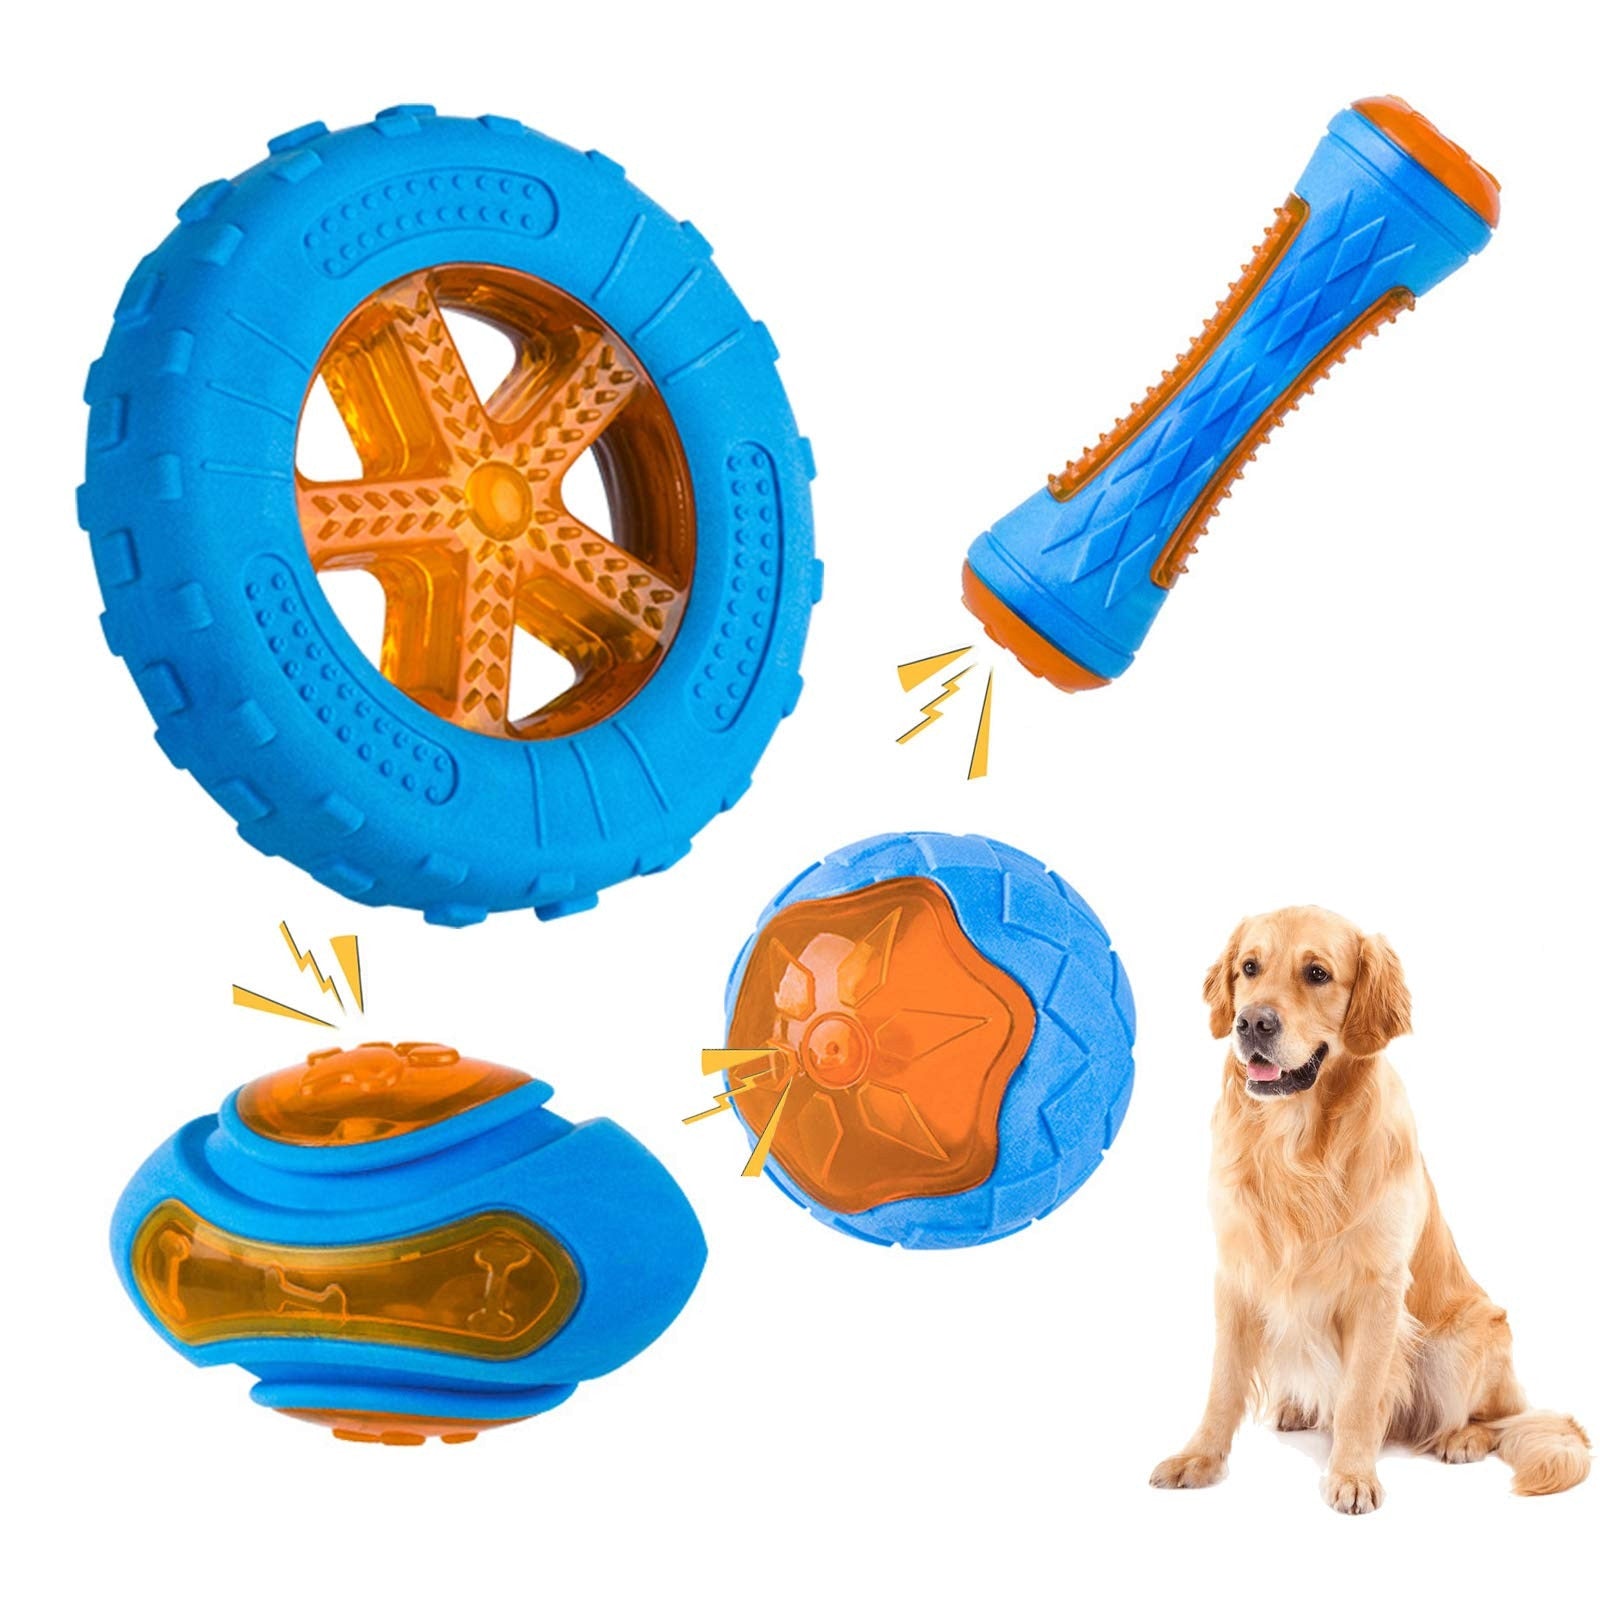 Rubber Dog Chewing Bite Squeaky Interactive Toy for pet